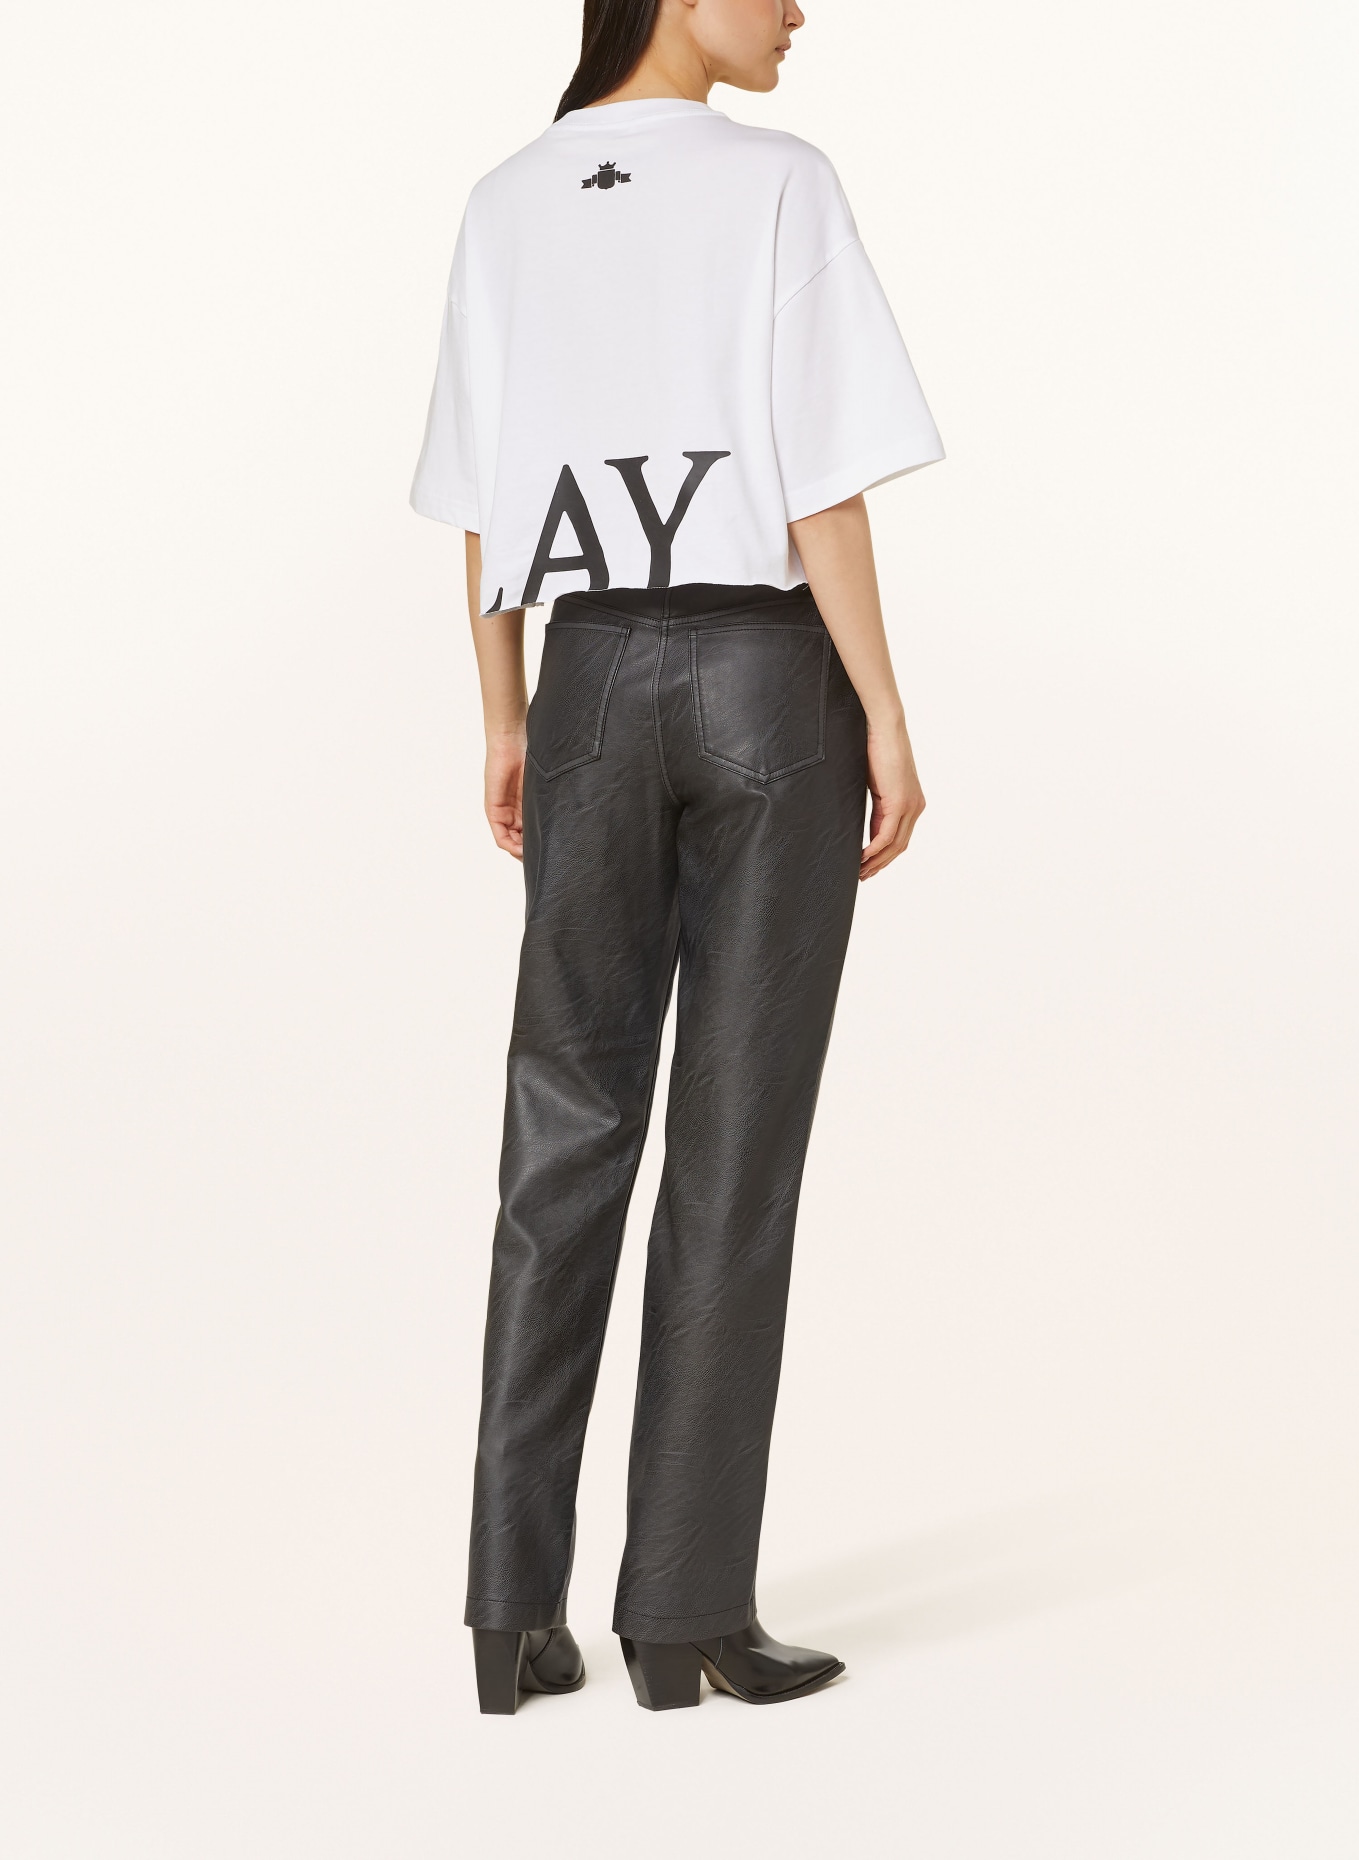 REPLAY Cropped-Shirt, Farbe: WEISS (Bild 3)